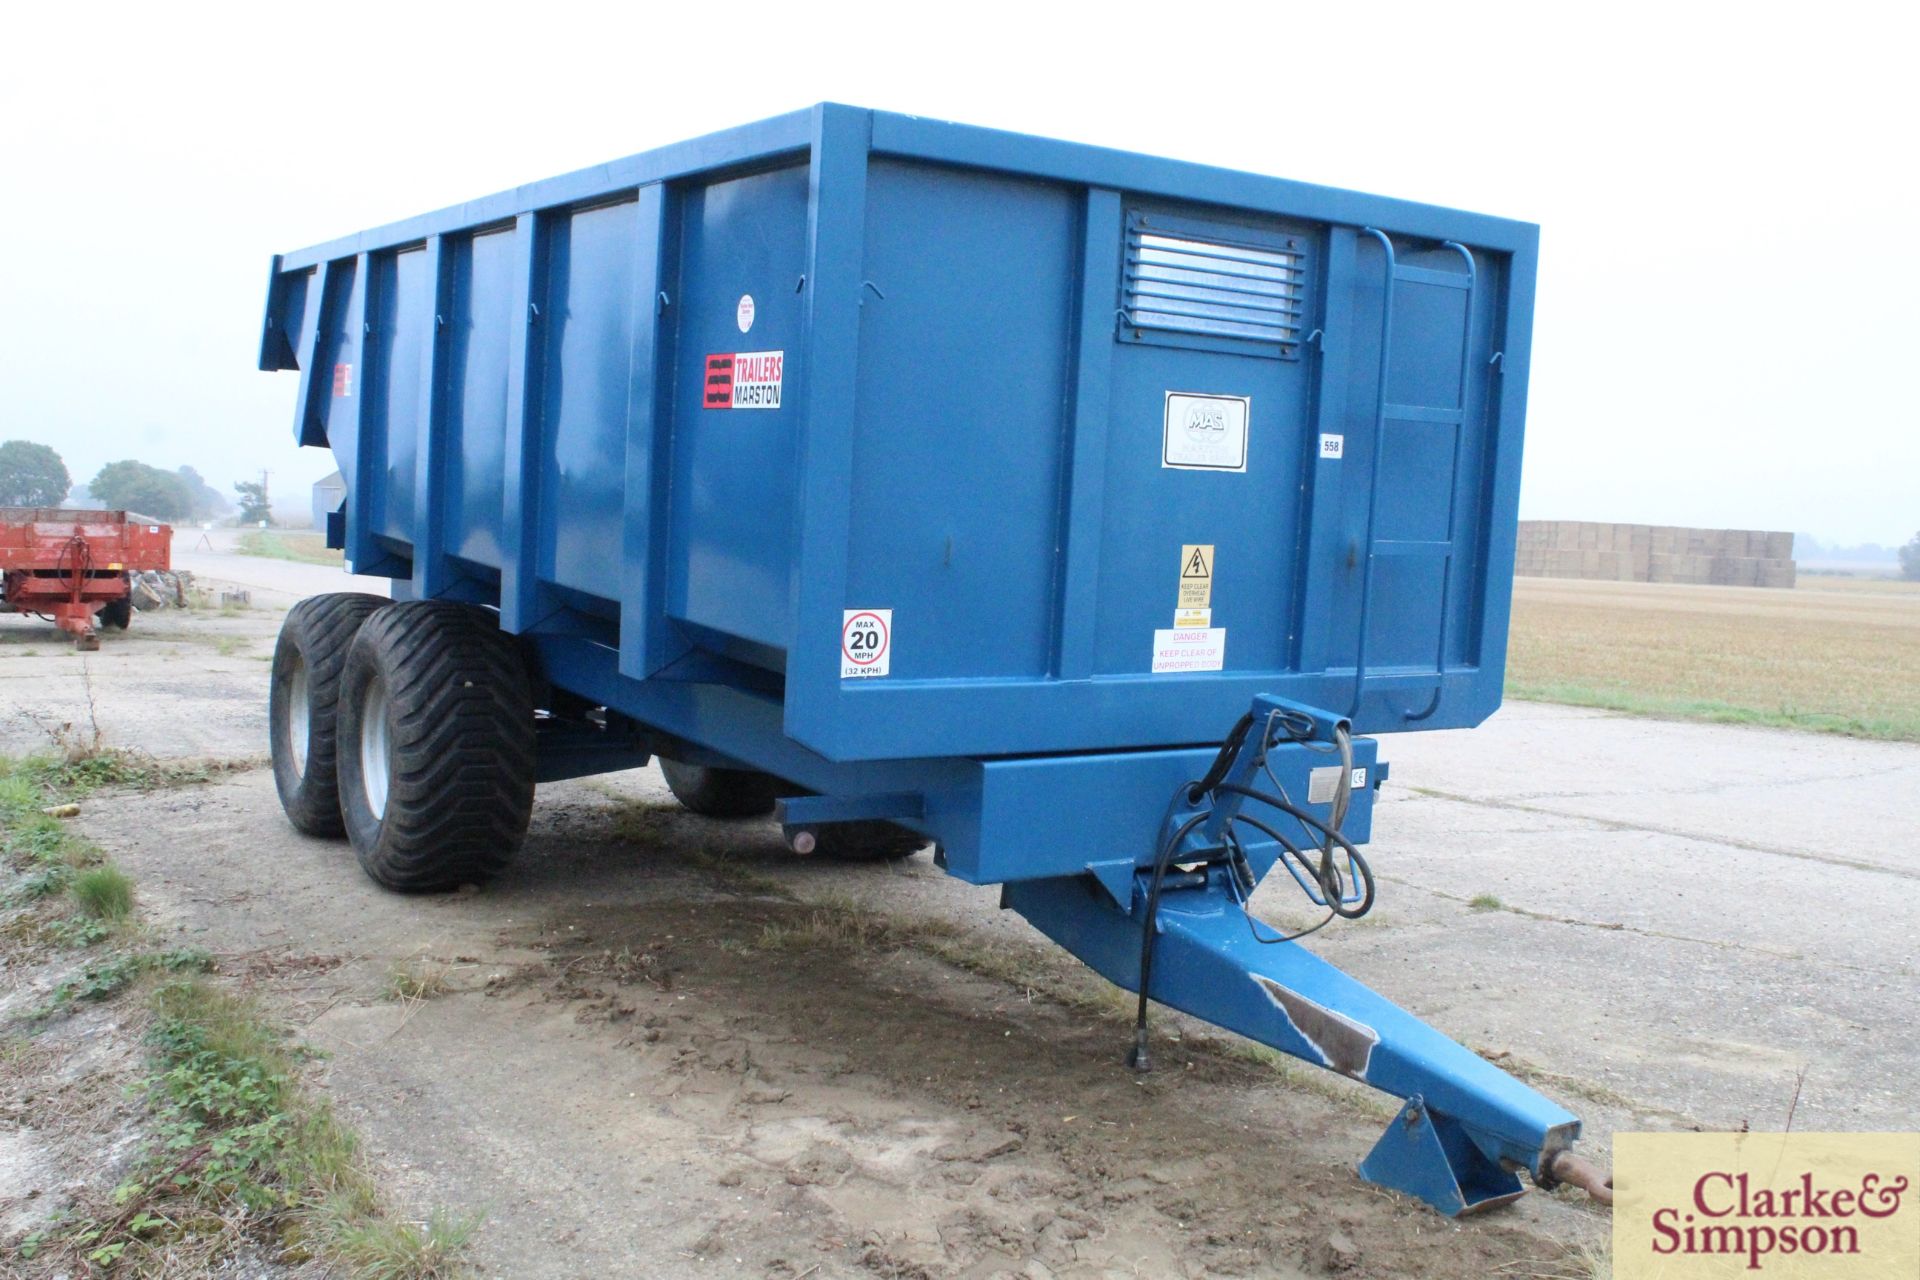 AS Marston ACE14D 14T twin axle dump trailer. 03/2011. Serial number 217341. With oil brakes, - Image 3 of 26